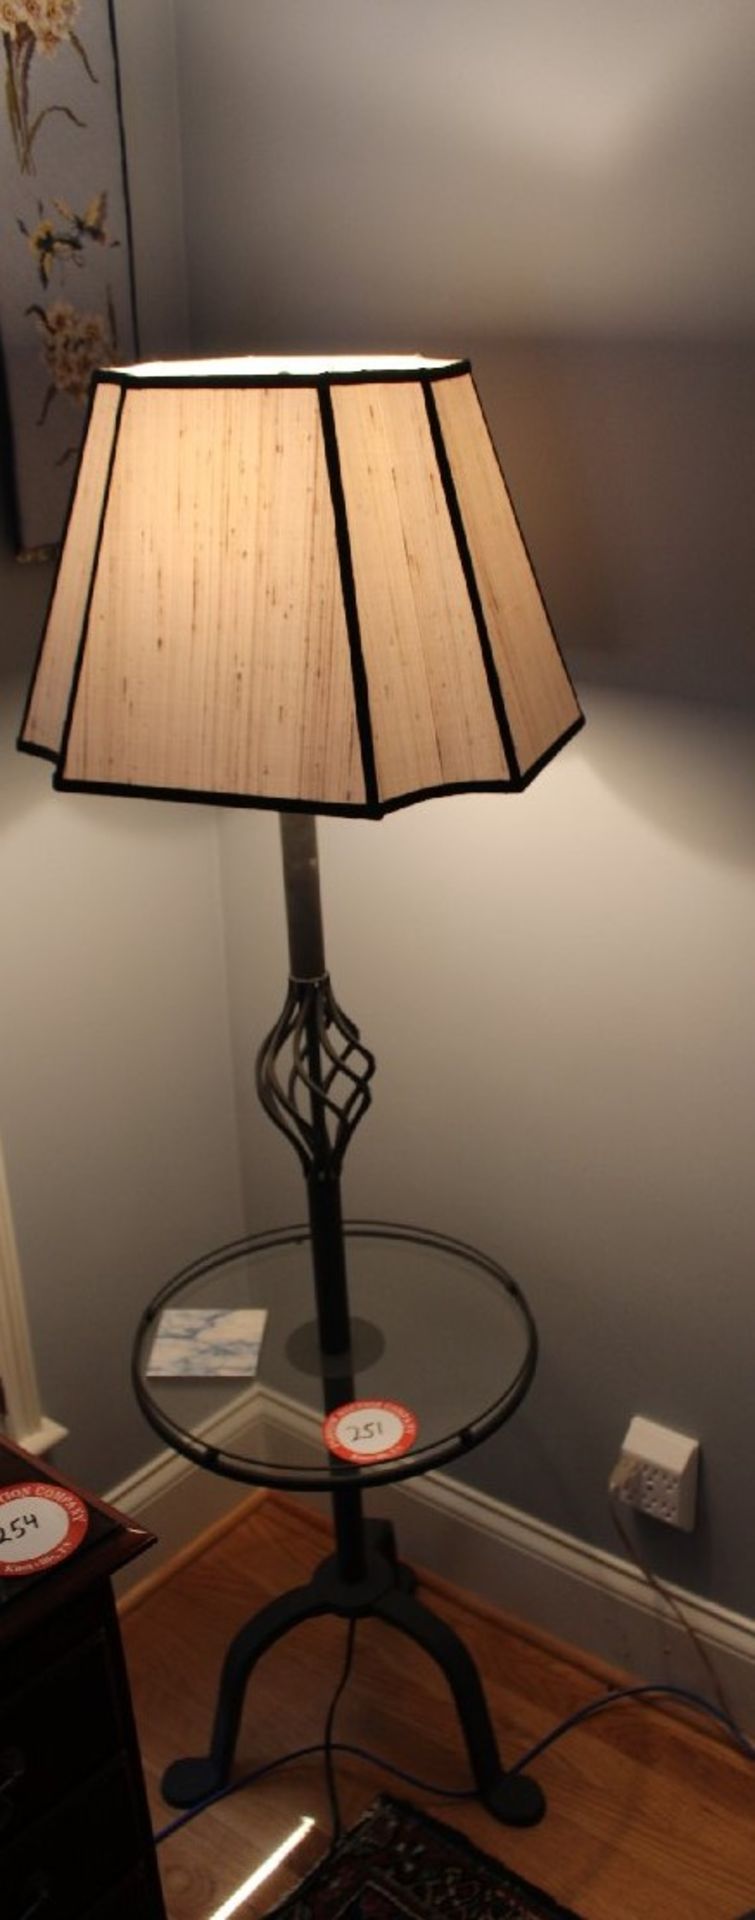 Decorative Floor Lamp with Integrated Table, Wrought Iron